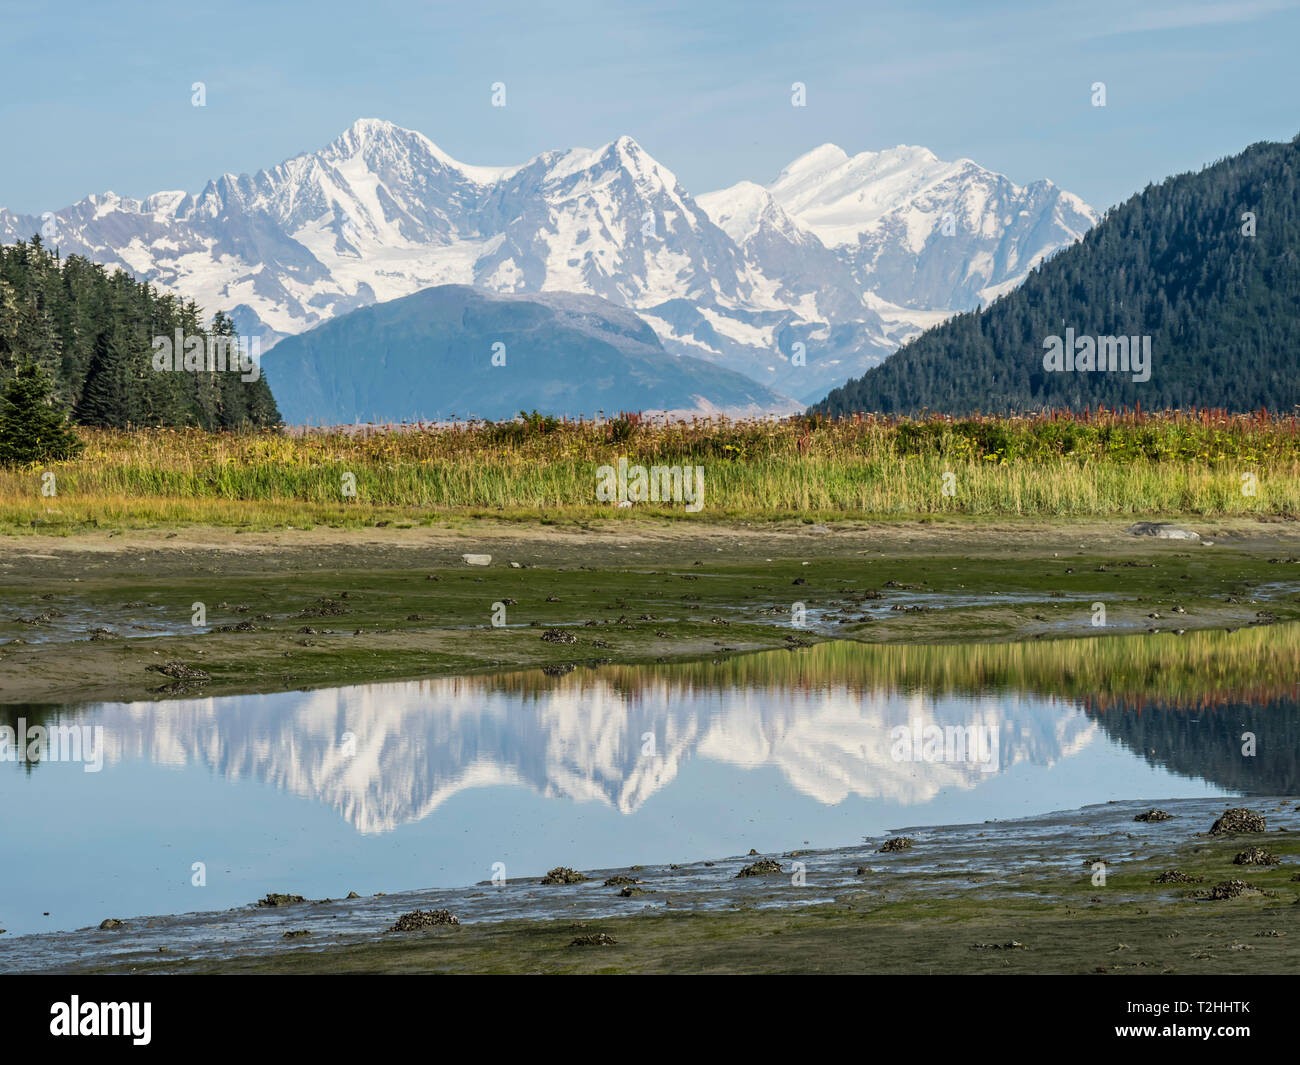 The Fairweather Range reflected in calm water, Fern Harbour, Glacier Bay National Park, Alaska, United States of America Stock Photo